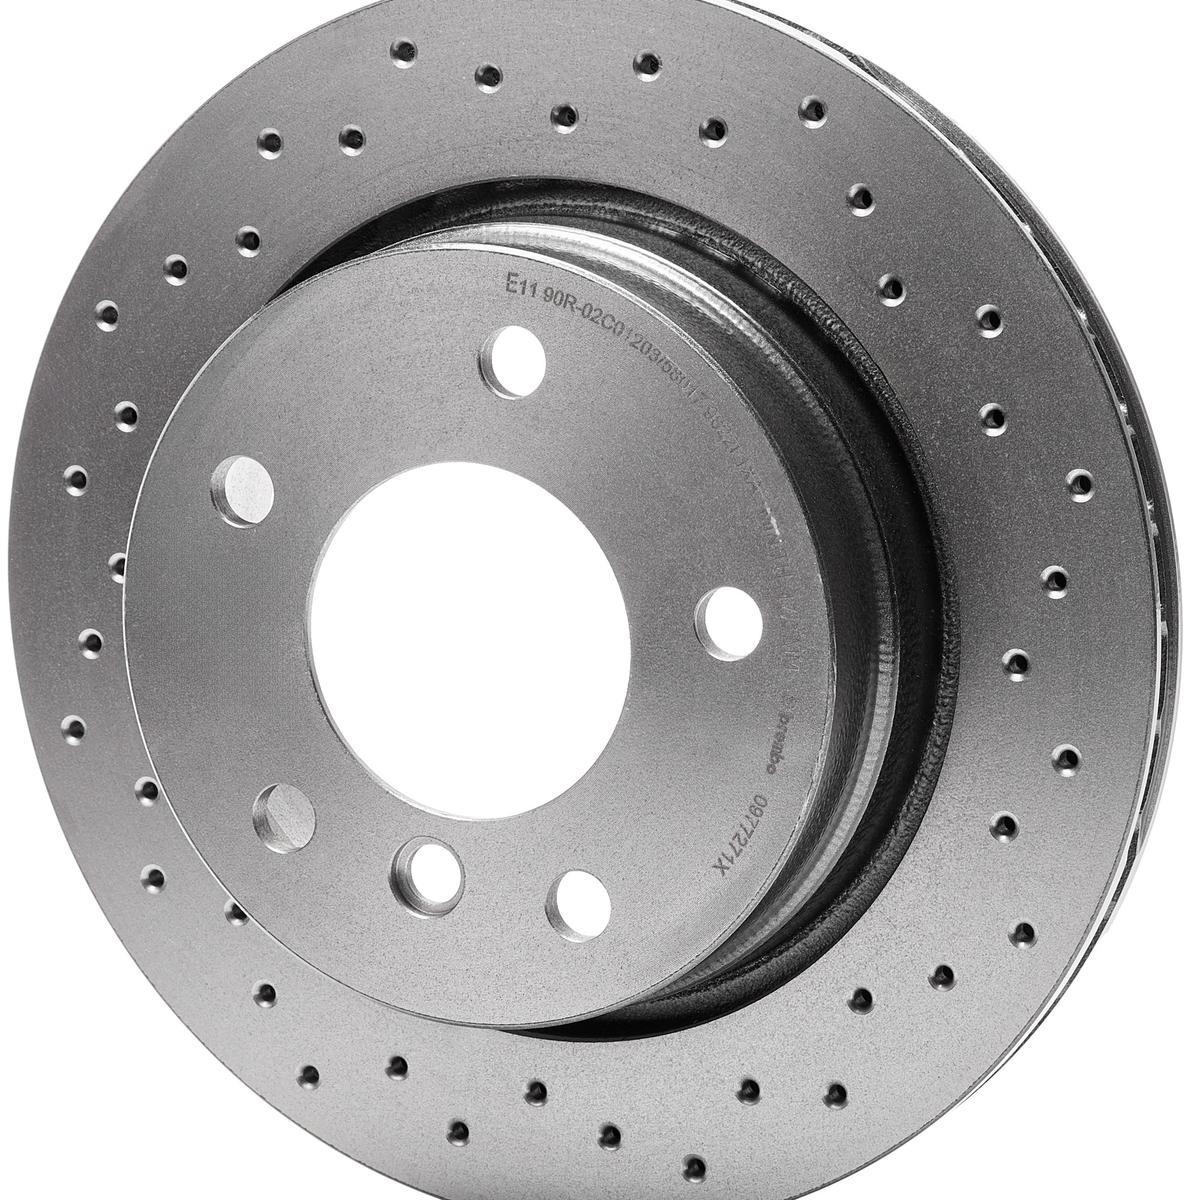 09.7727.1X Brake discs 09.7727.1X BREMBO 276x19mm, 5, perforated/vented, Coated, High-carbon